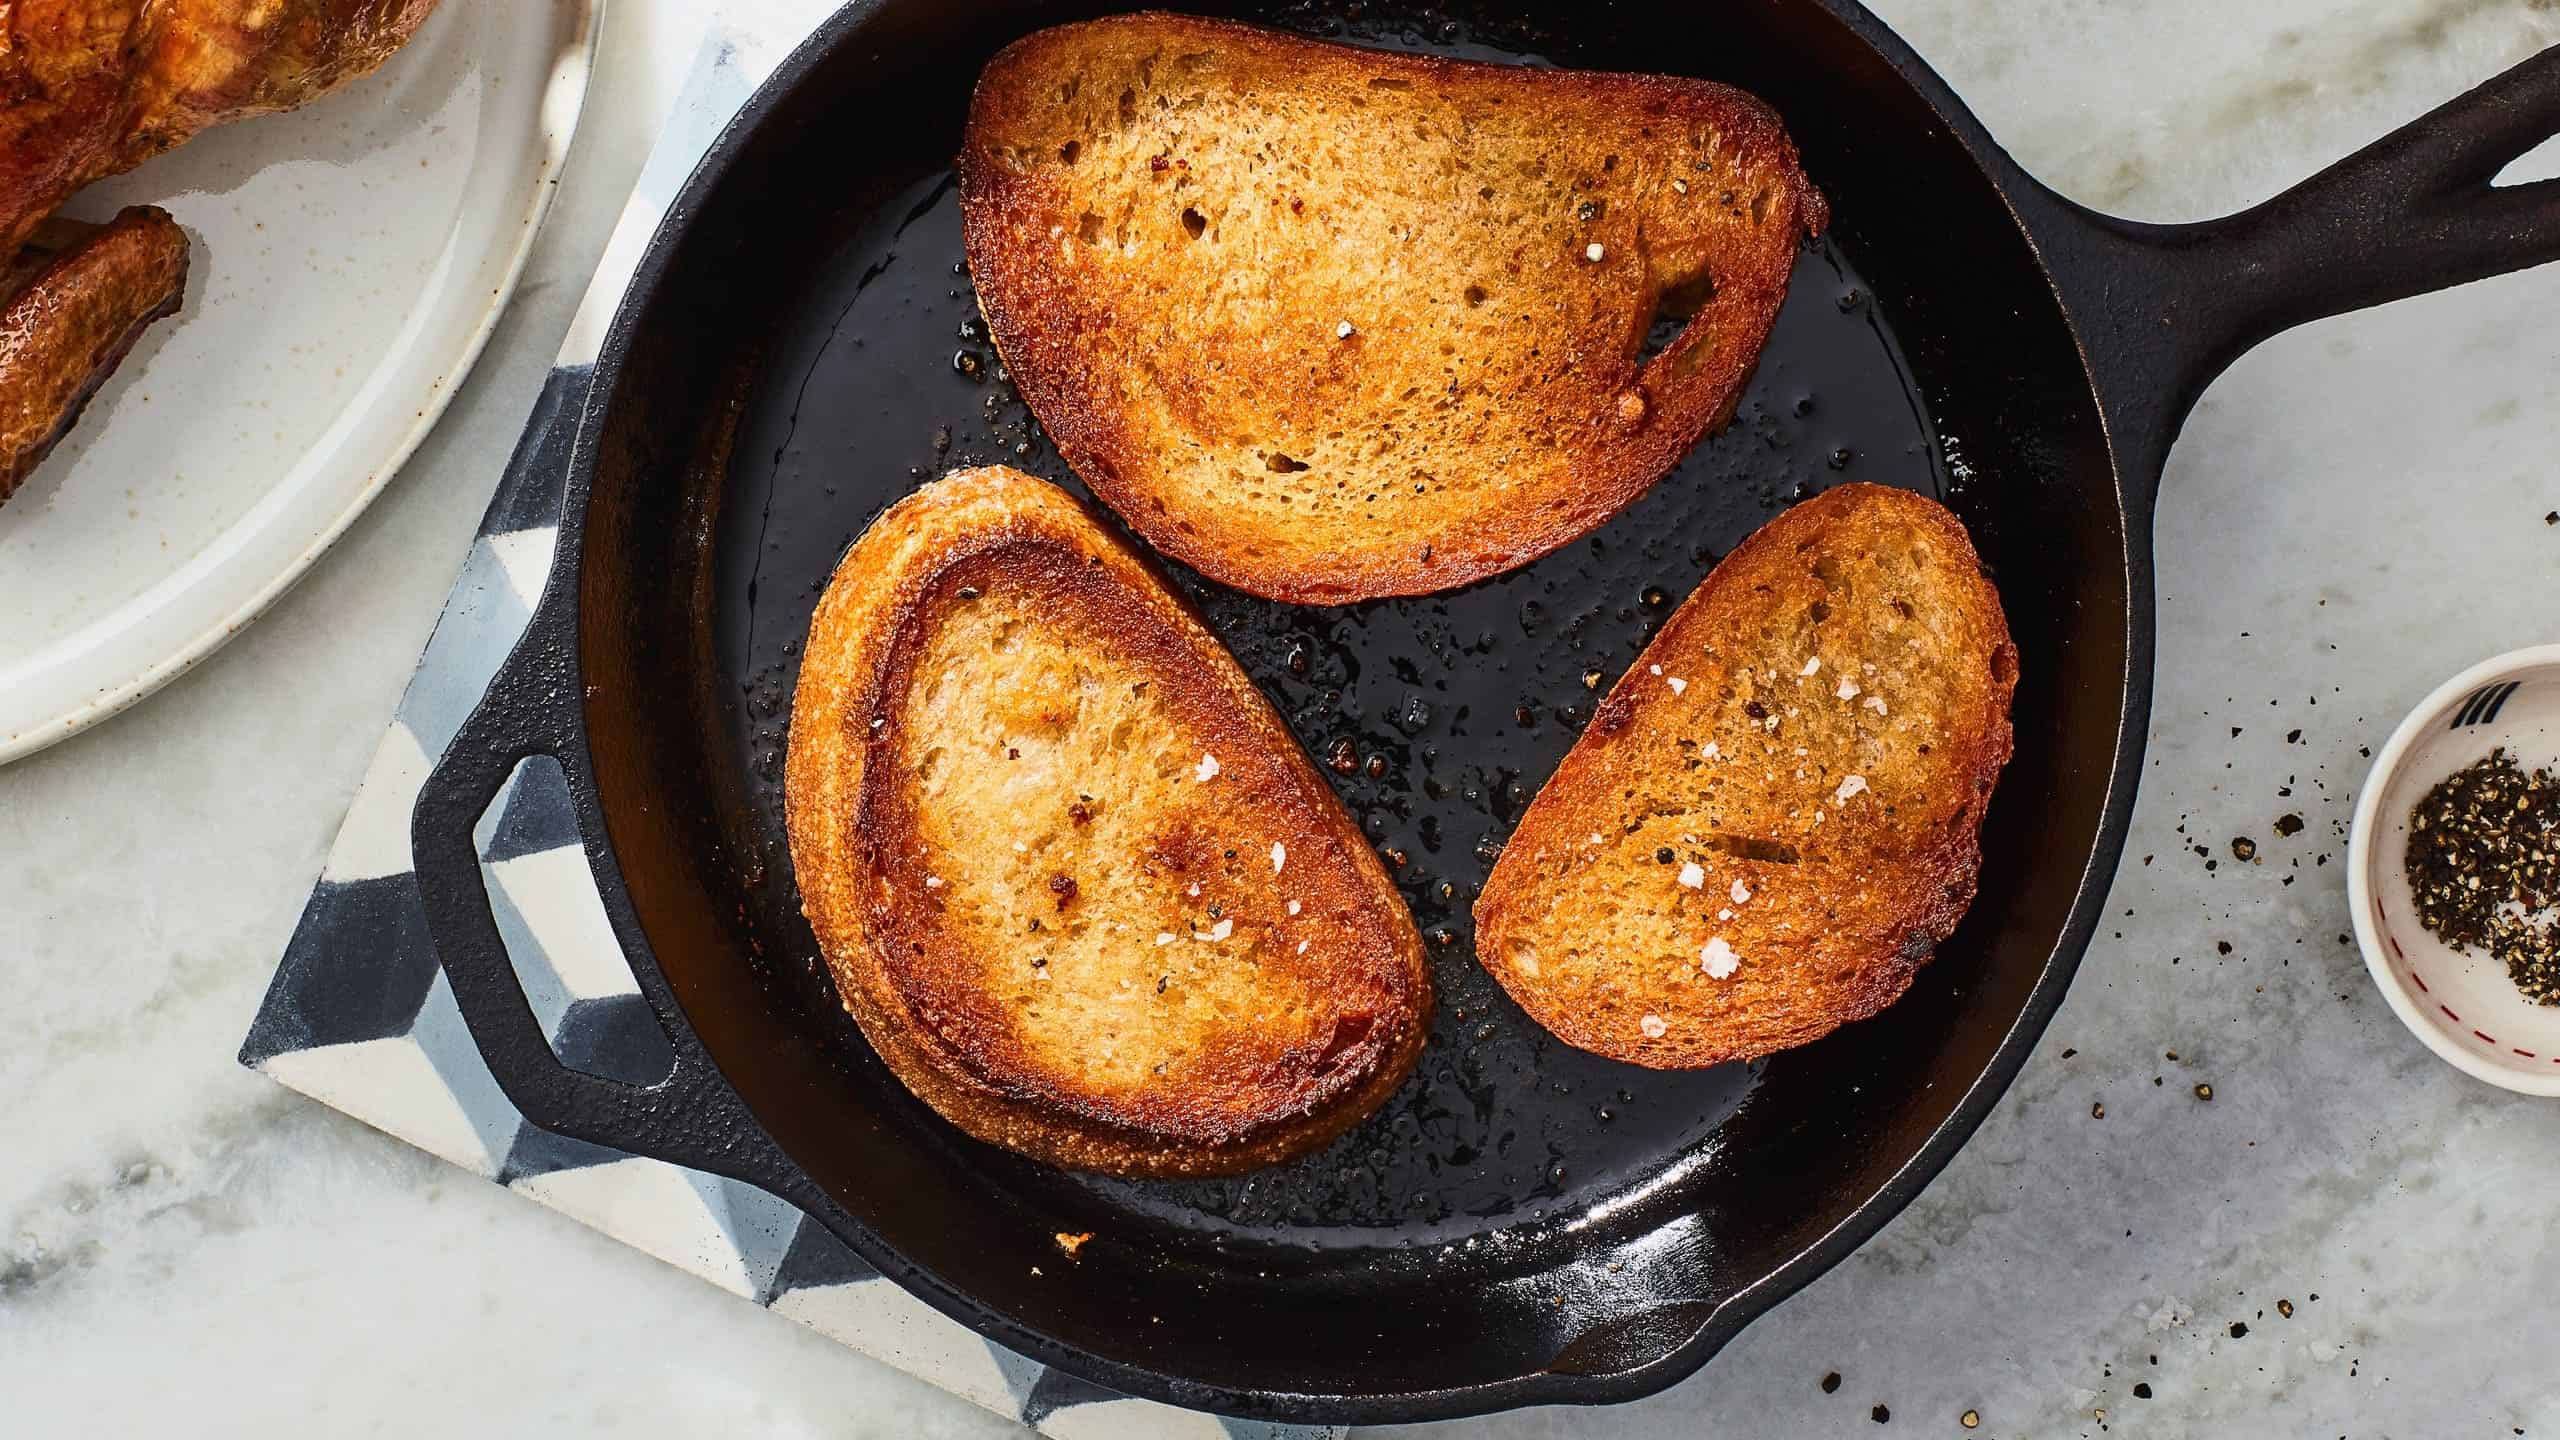 Toasting bread on the stovetop